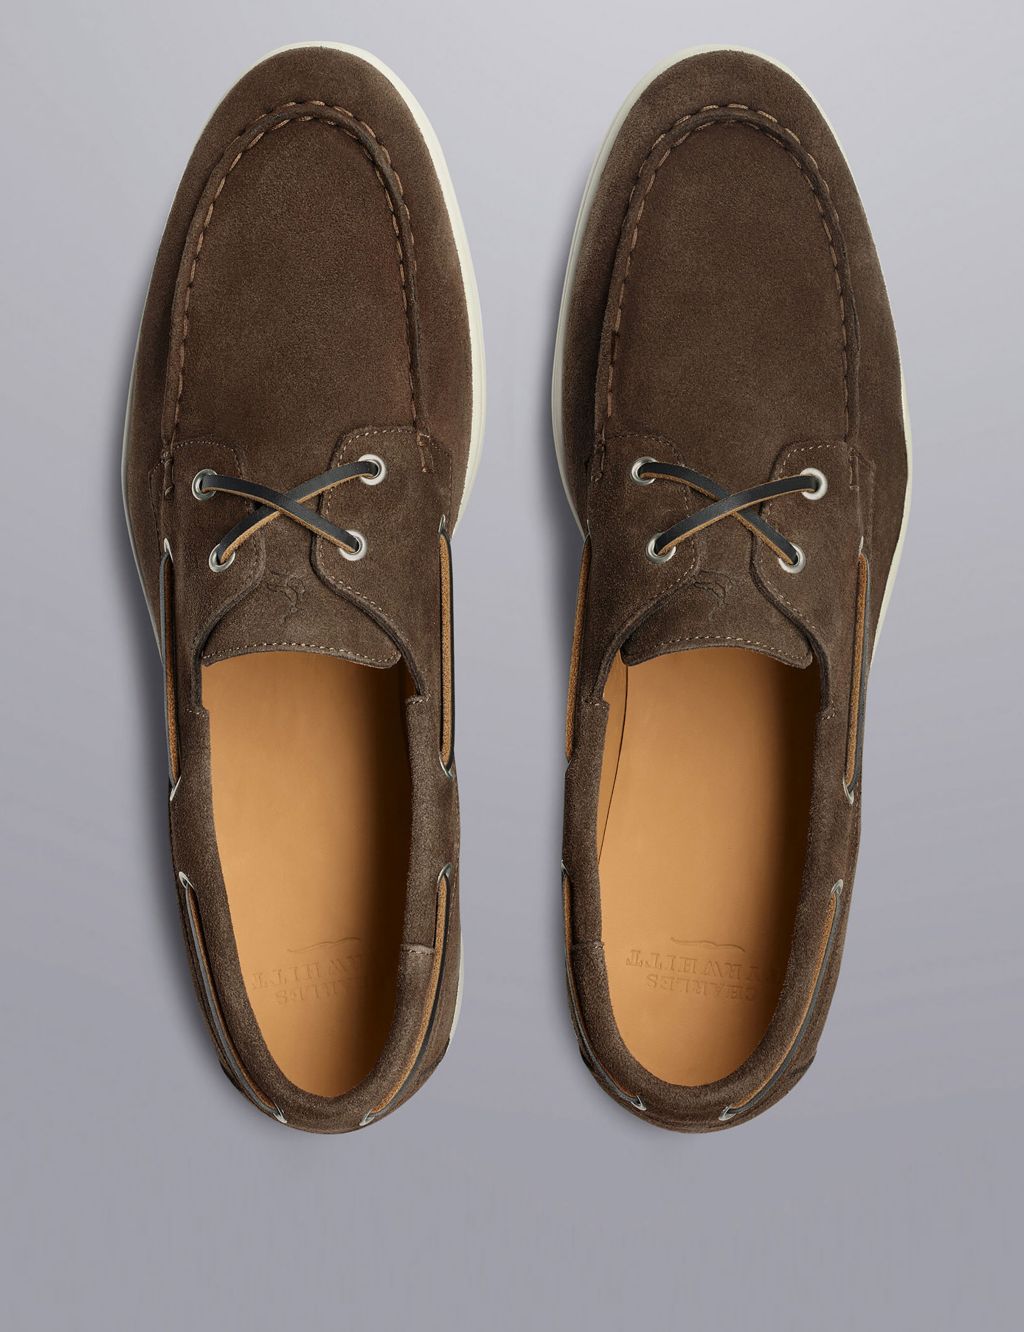 Suede Slip On Boat Shoes image 2